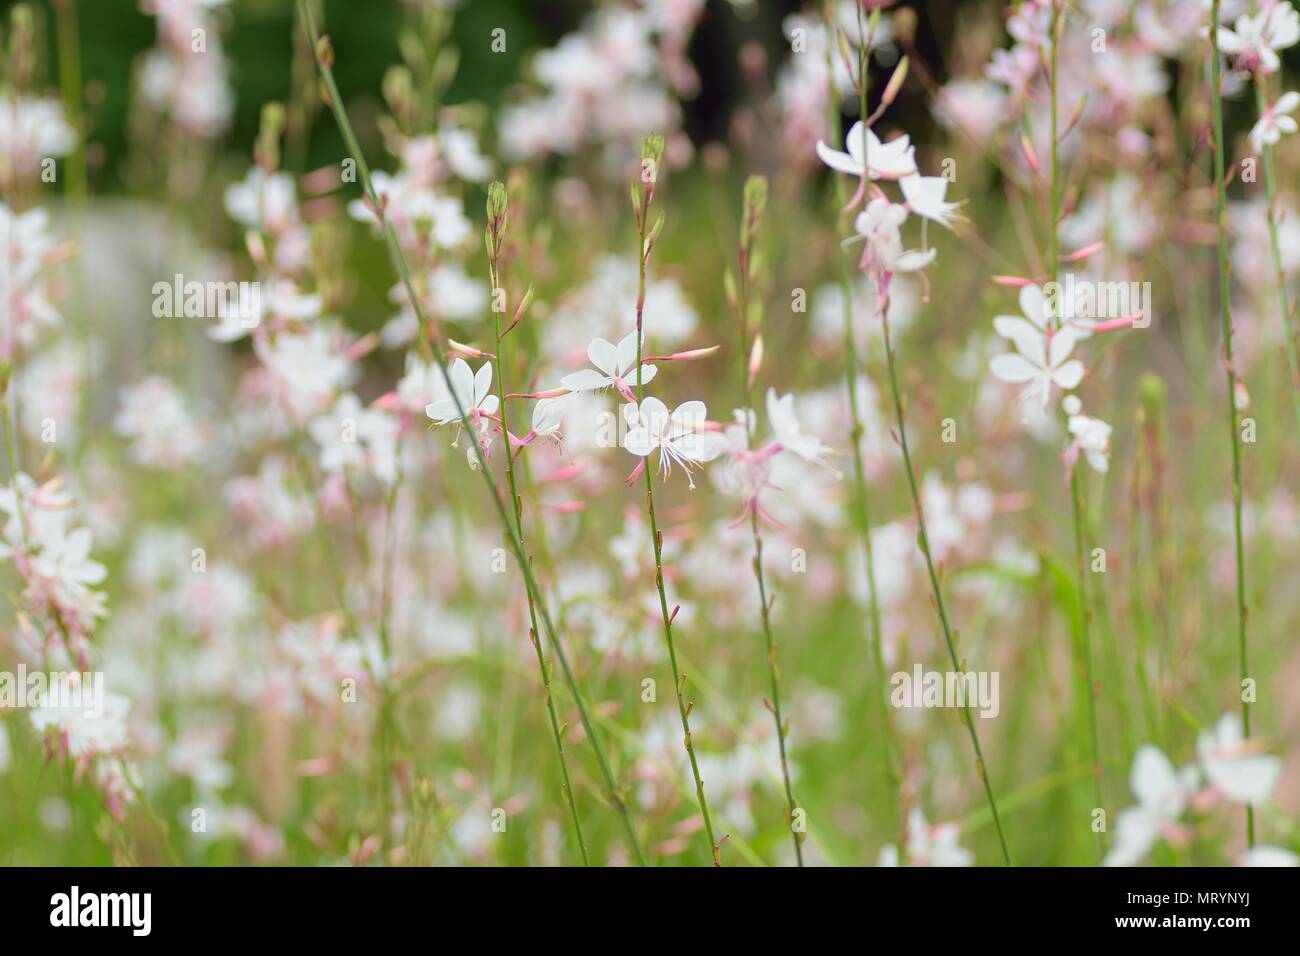 Background texture of blooming wild summer flowers Stock Photo